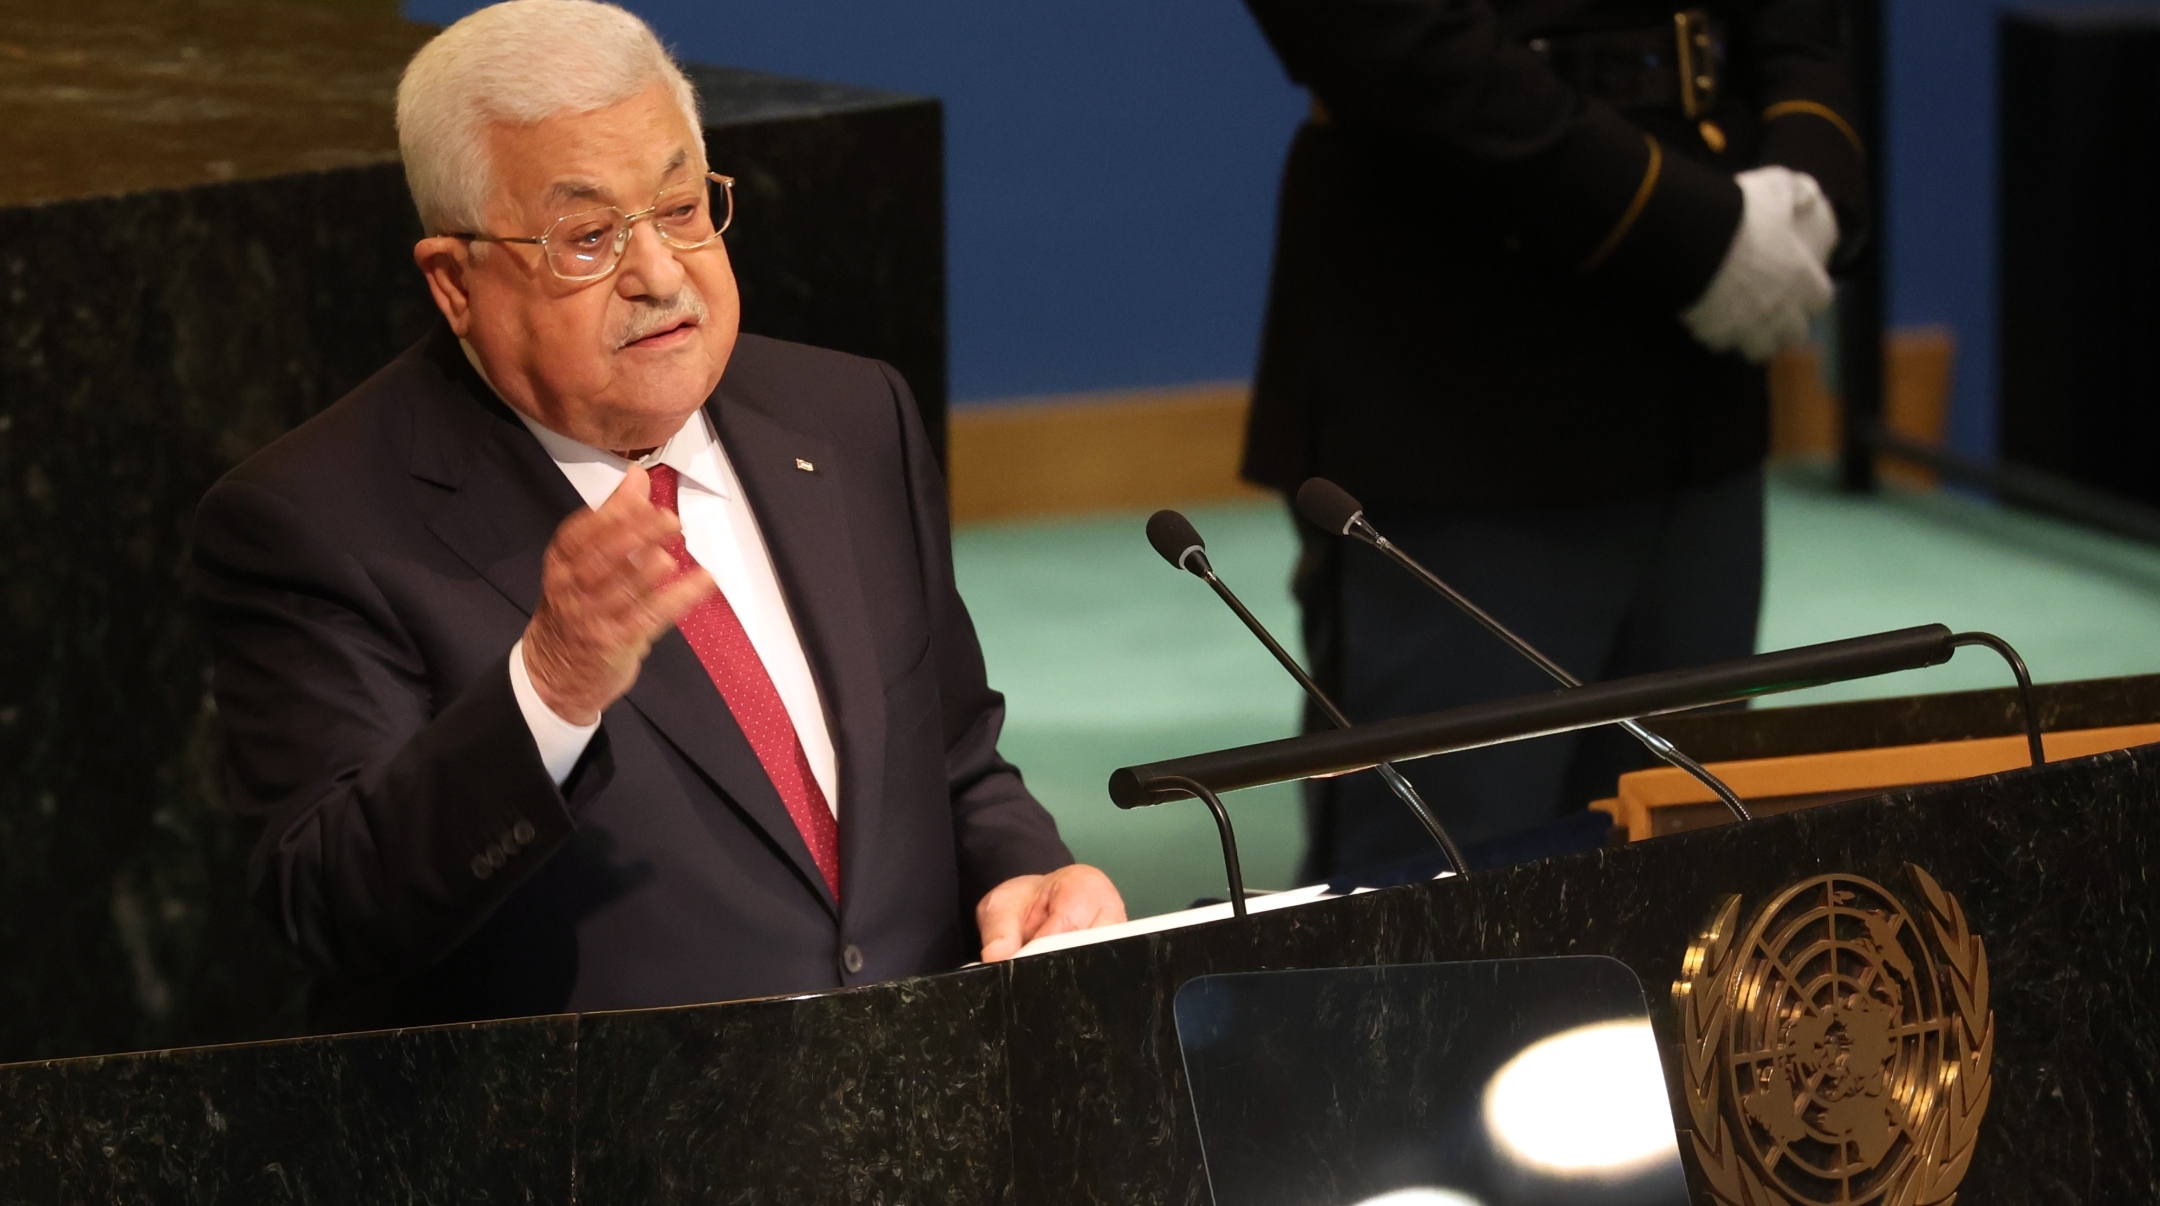  ‘We must speak to the Zionist lobby’: Mahmoud Abbas urges Palestinian Americans to engage with...